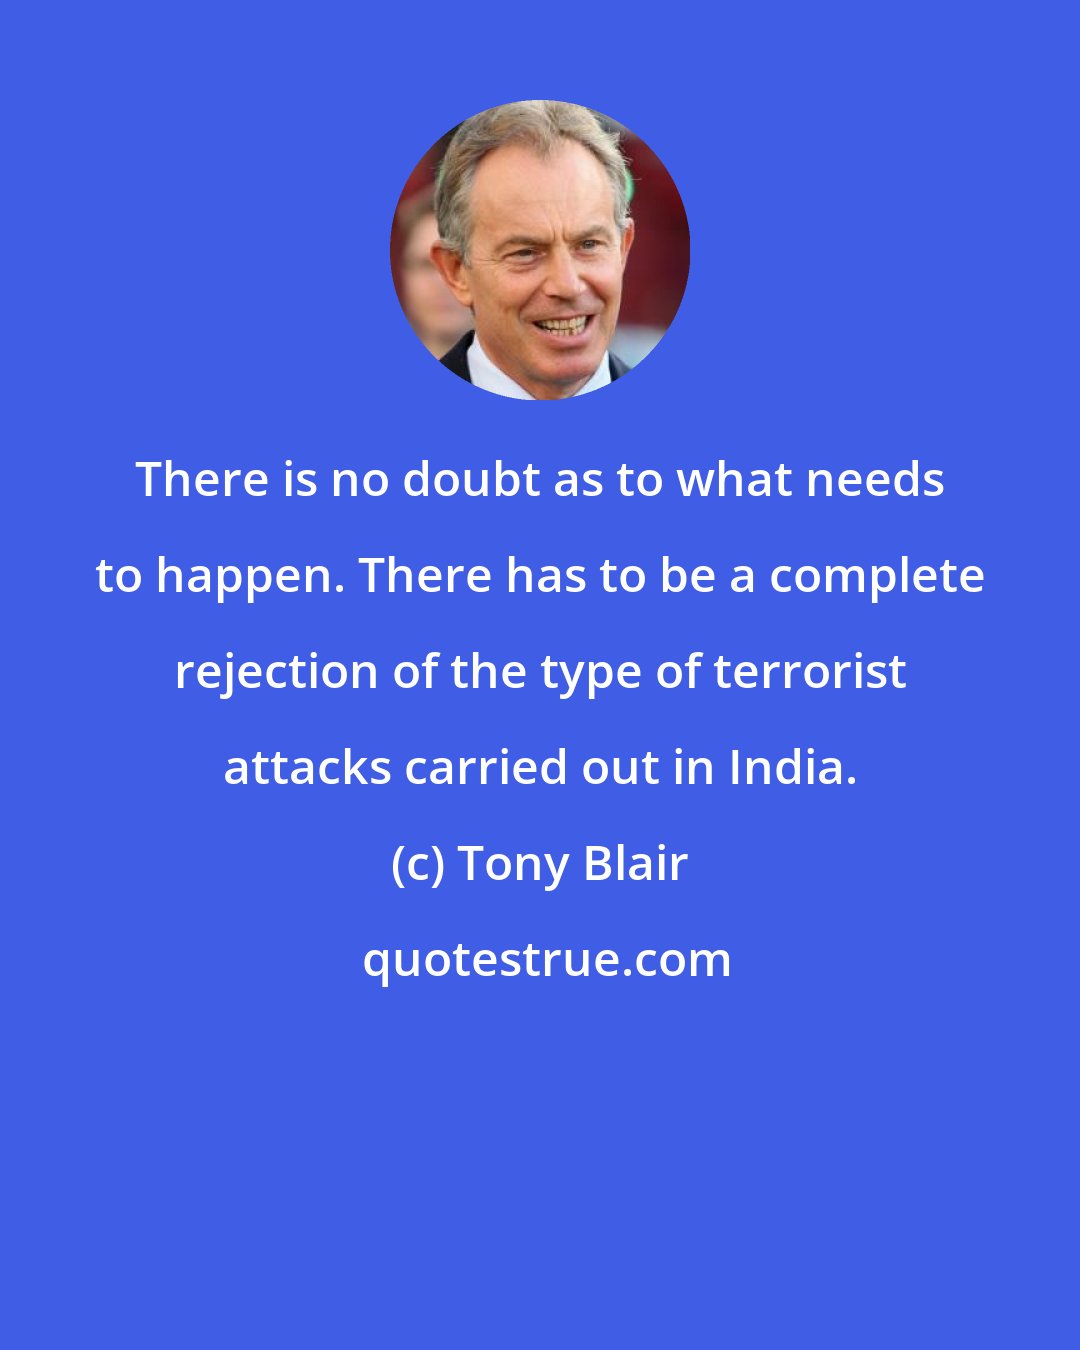 Tony Blair: There is no doubt as to what needs to happen. There has to be a complete rejection of the type of terrorist attacks carried out in India.